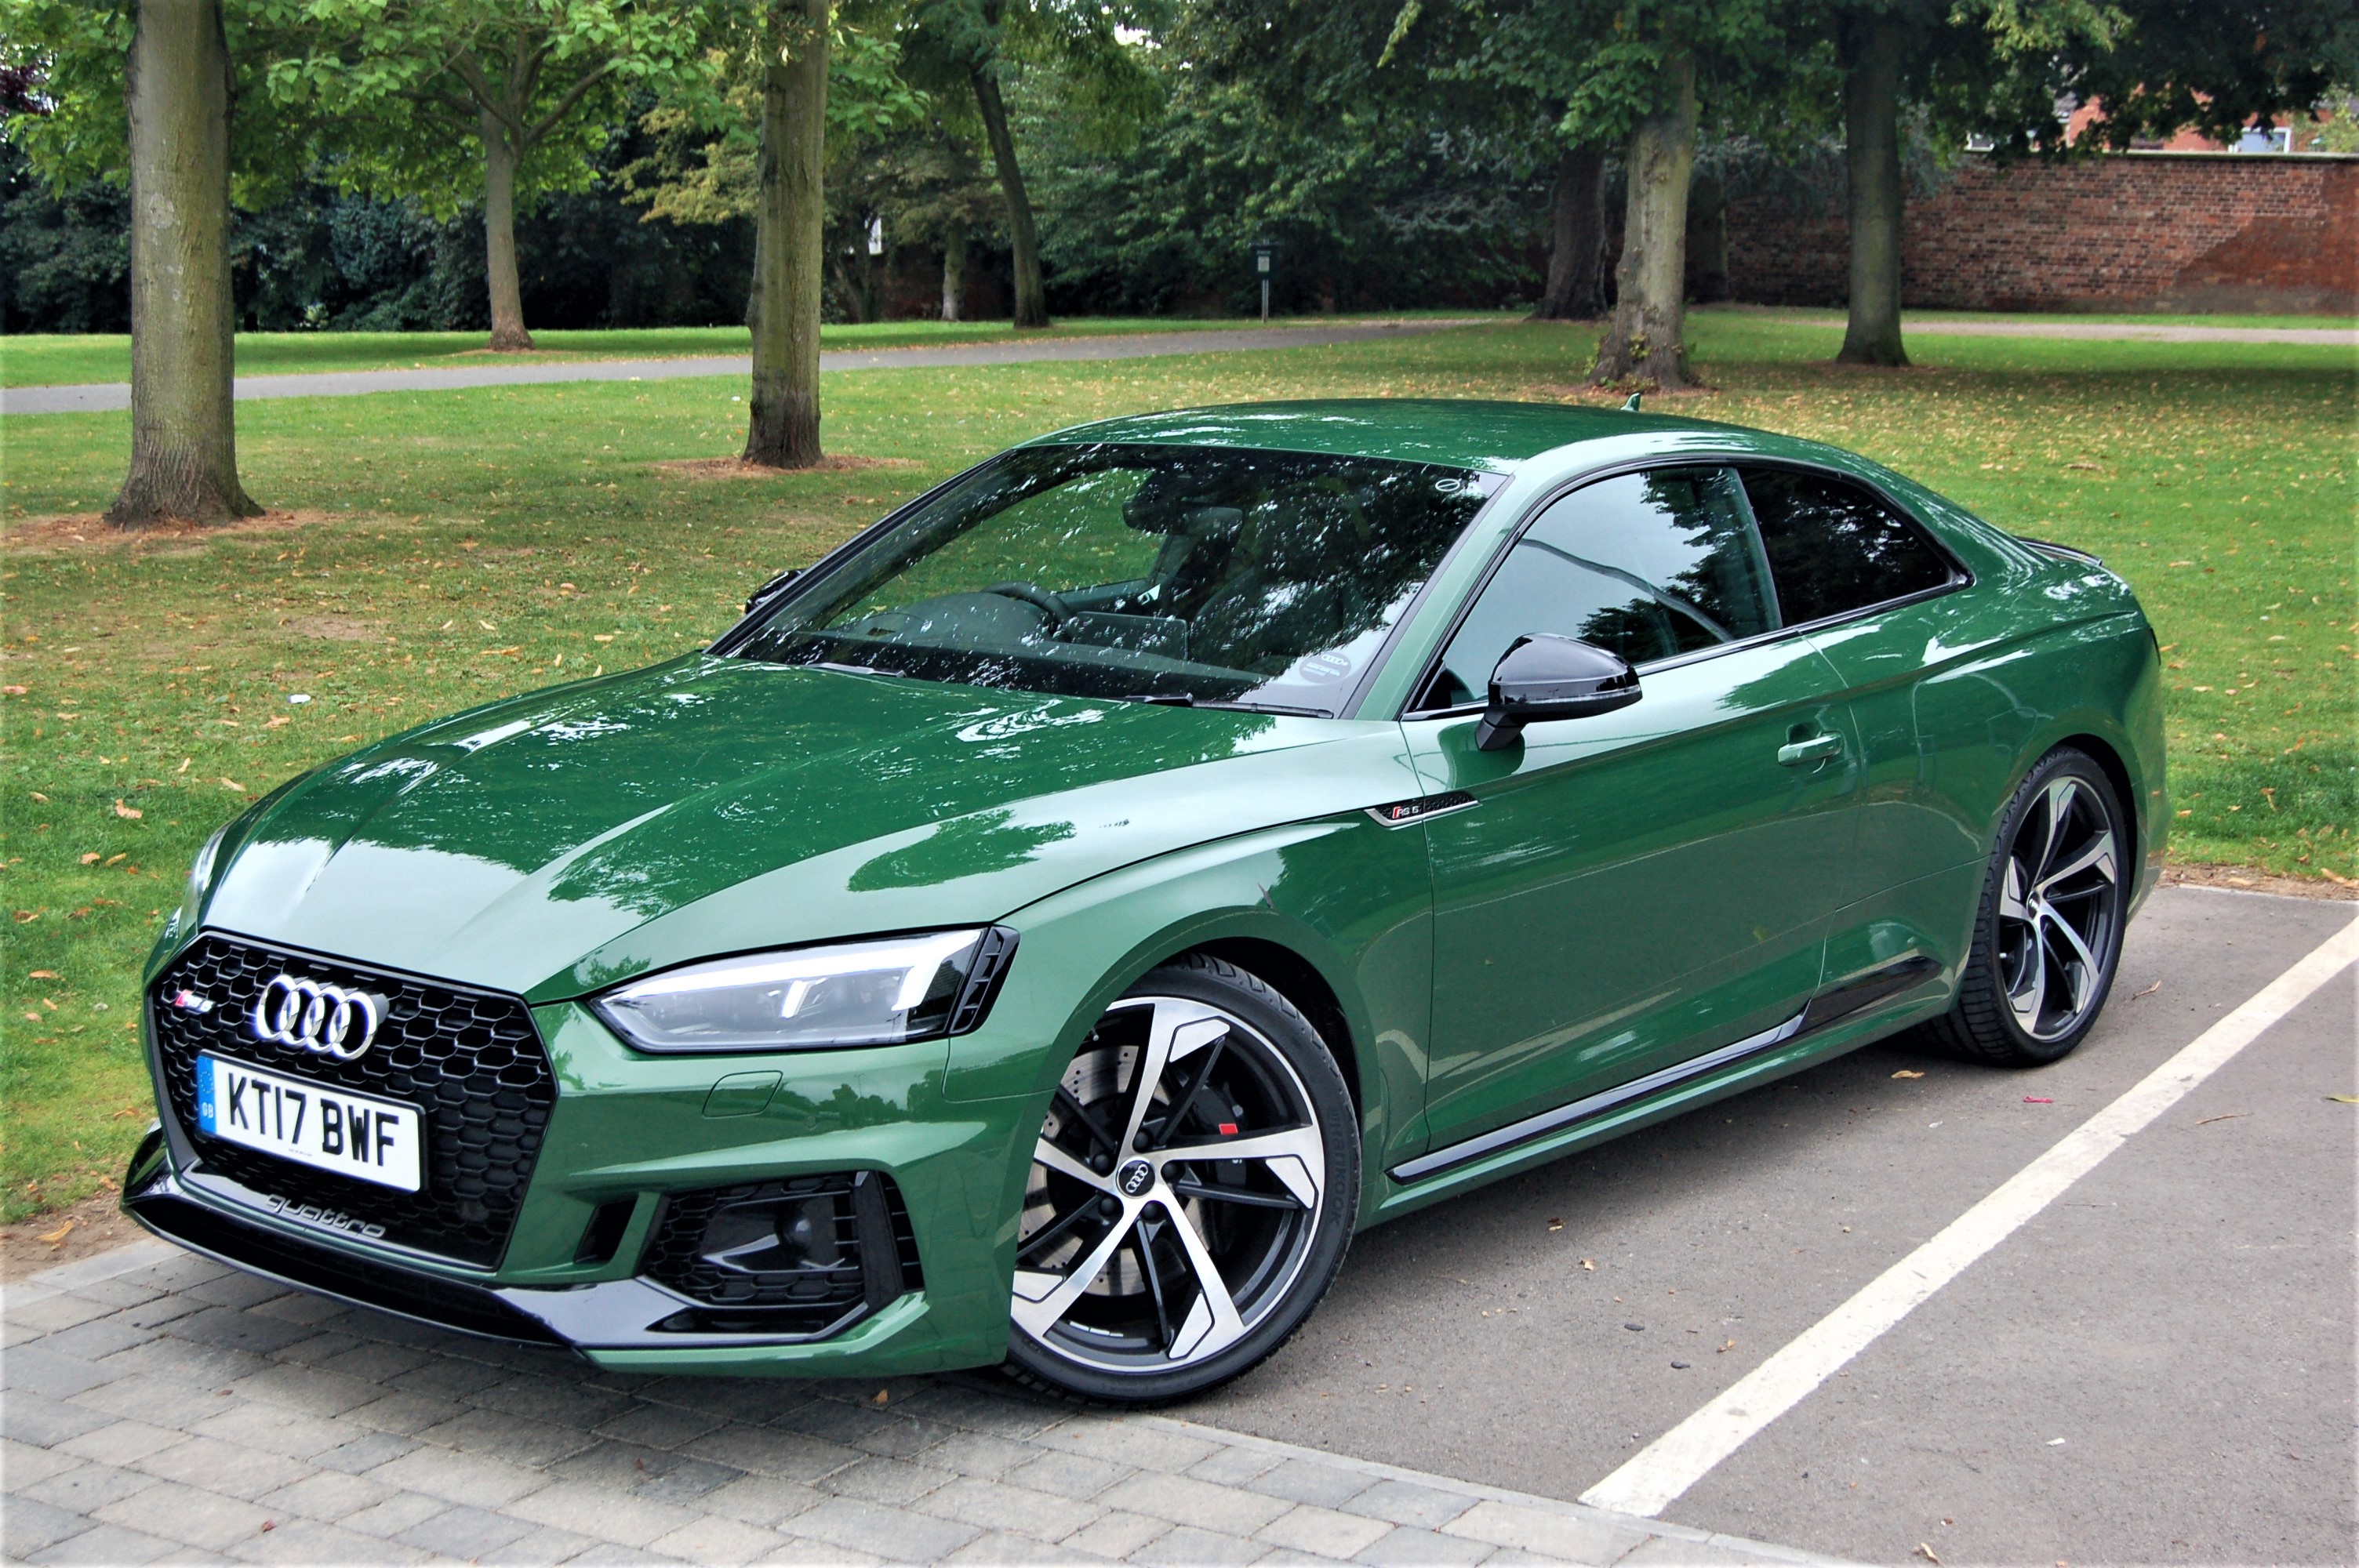 Audi RS5 epitomises a sense of victory for the German manufacturer